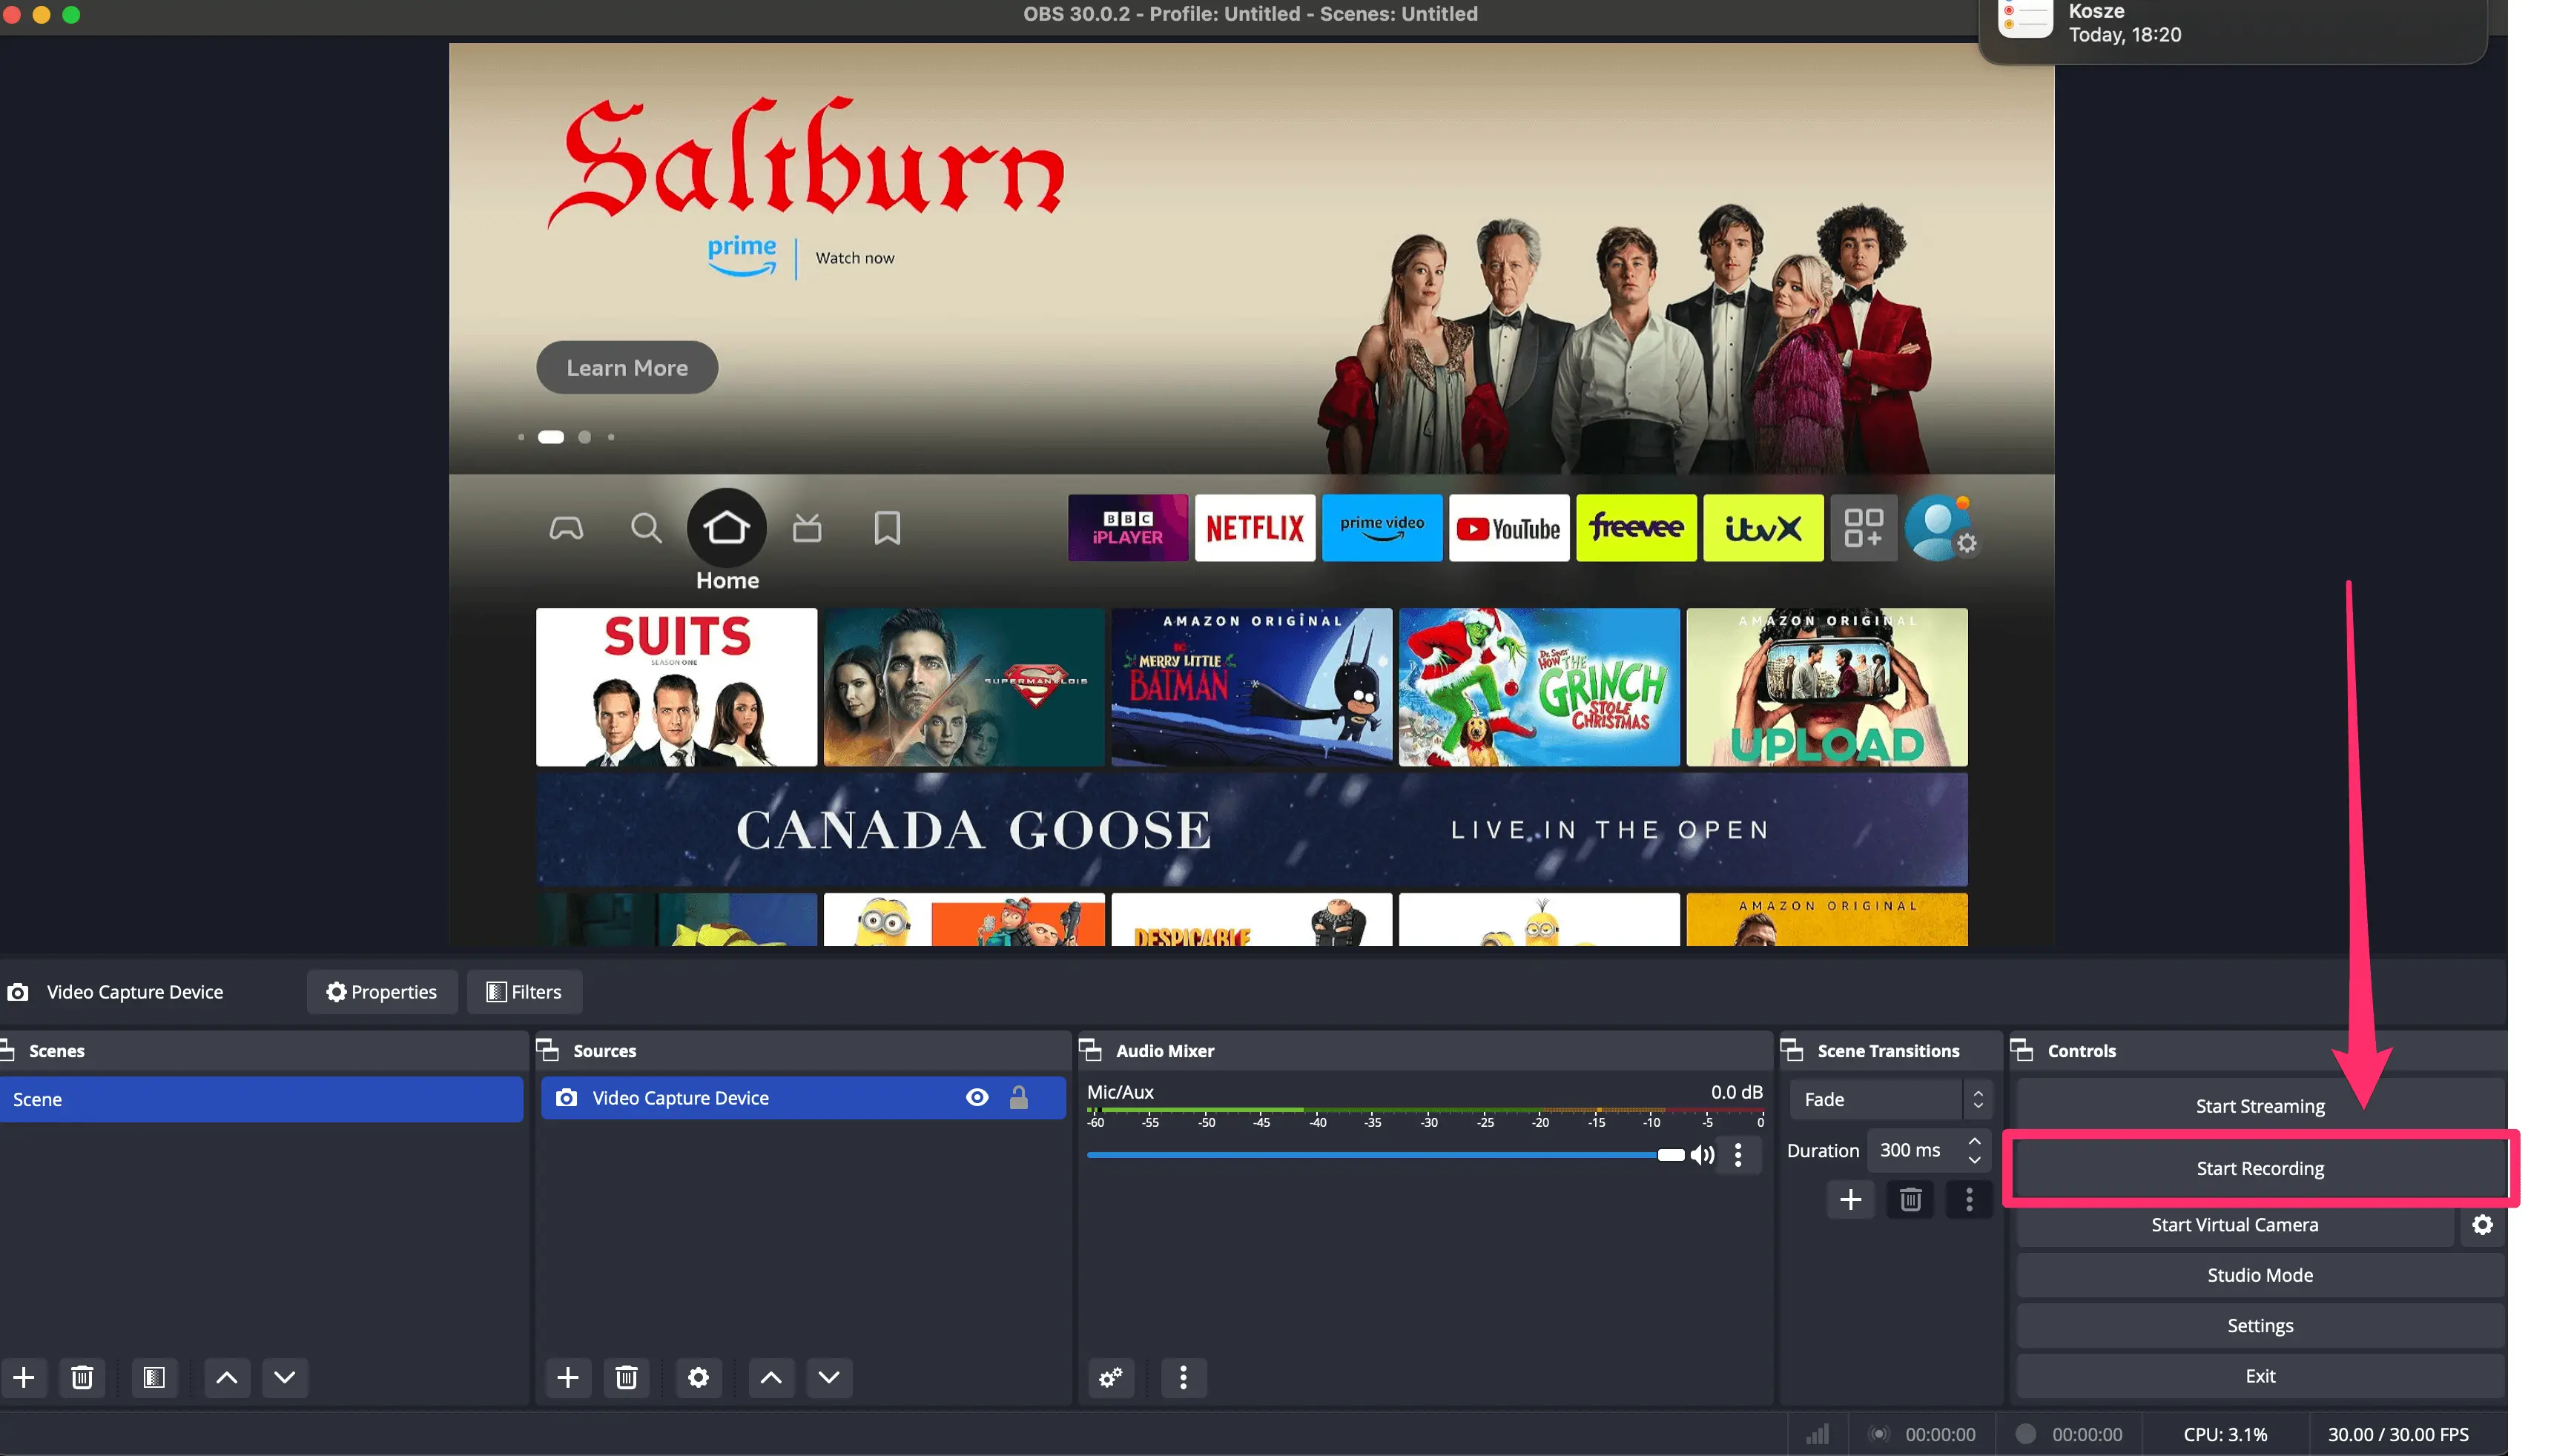 A screenshot of the OBS software interface with the main screen showing a webpage, and the controls section highlighted to show the "Start Recording" button.